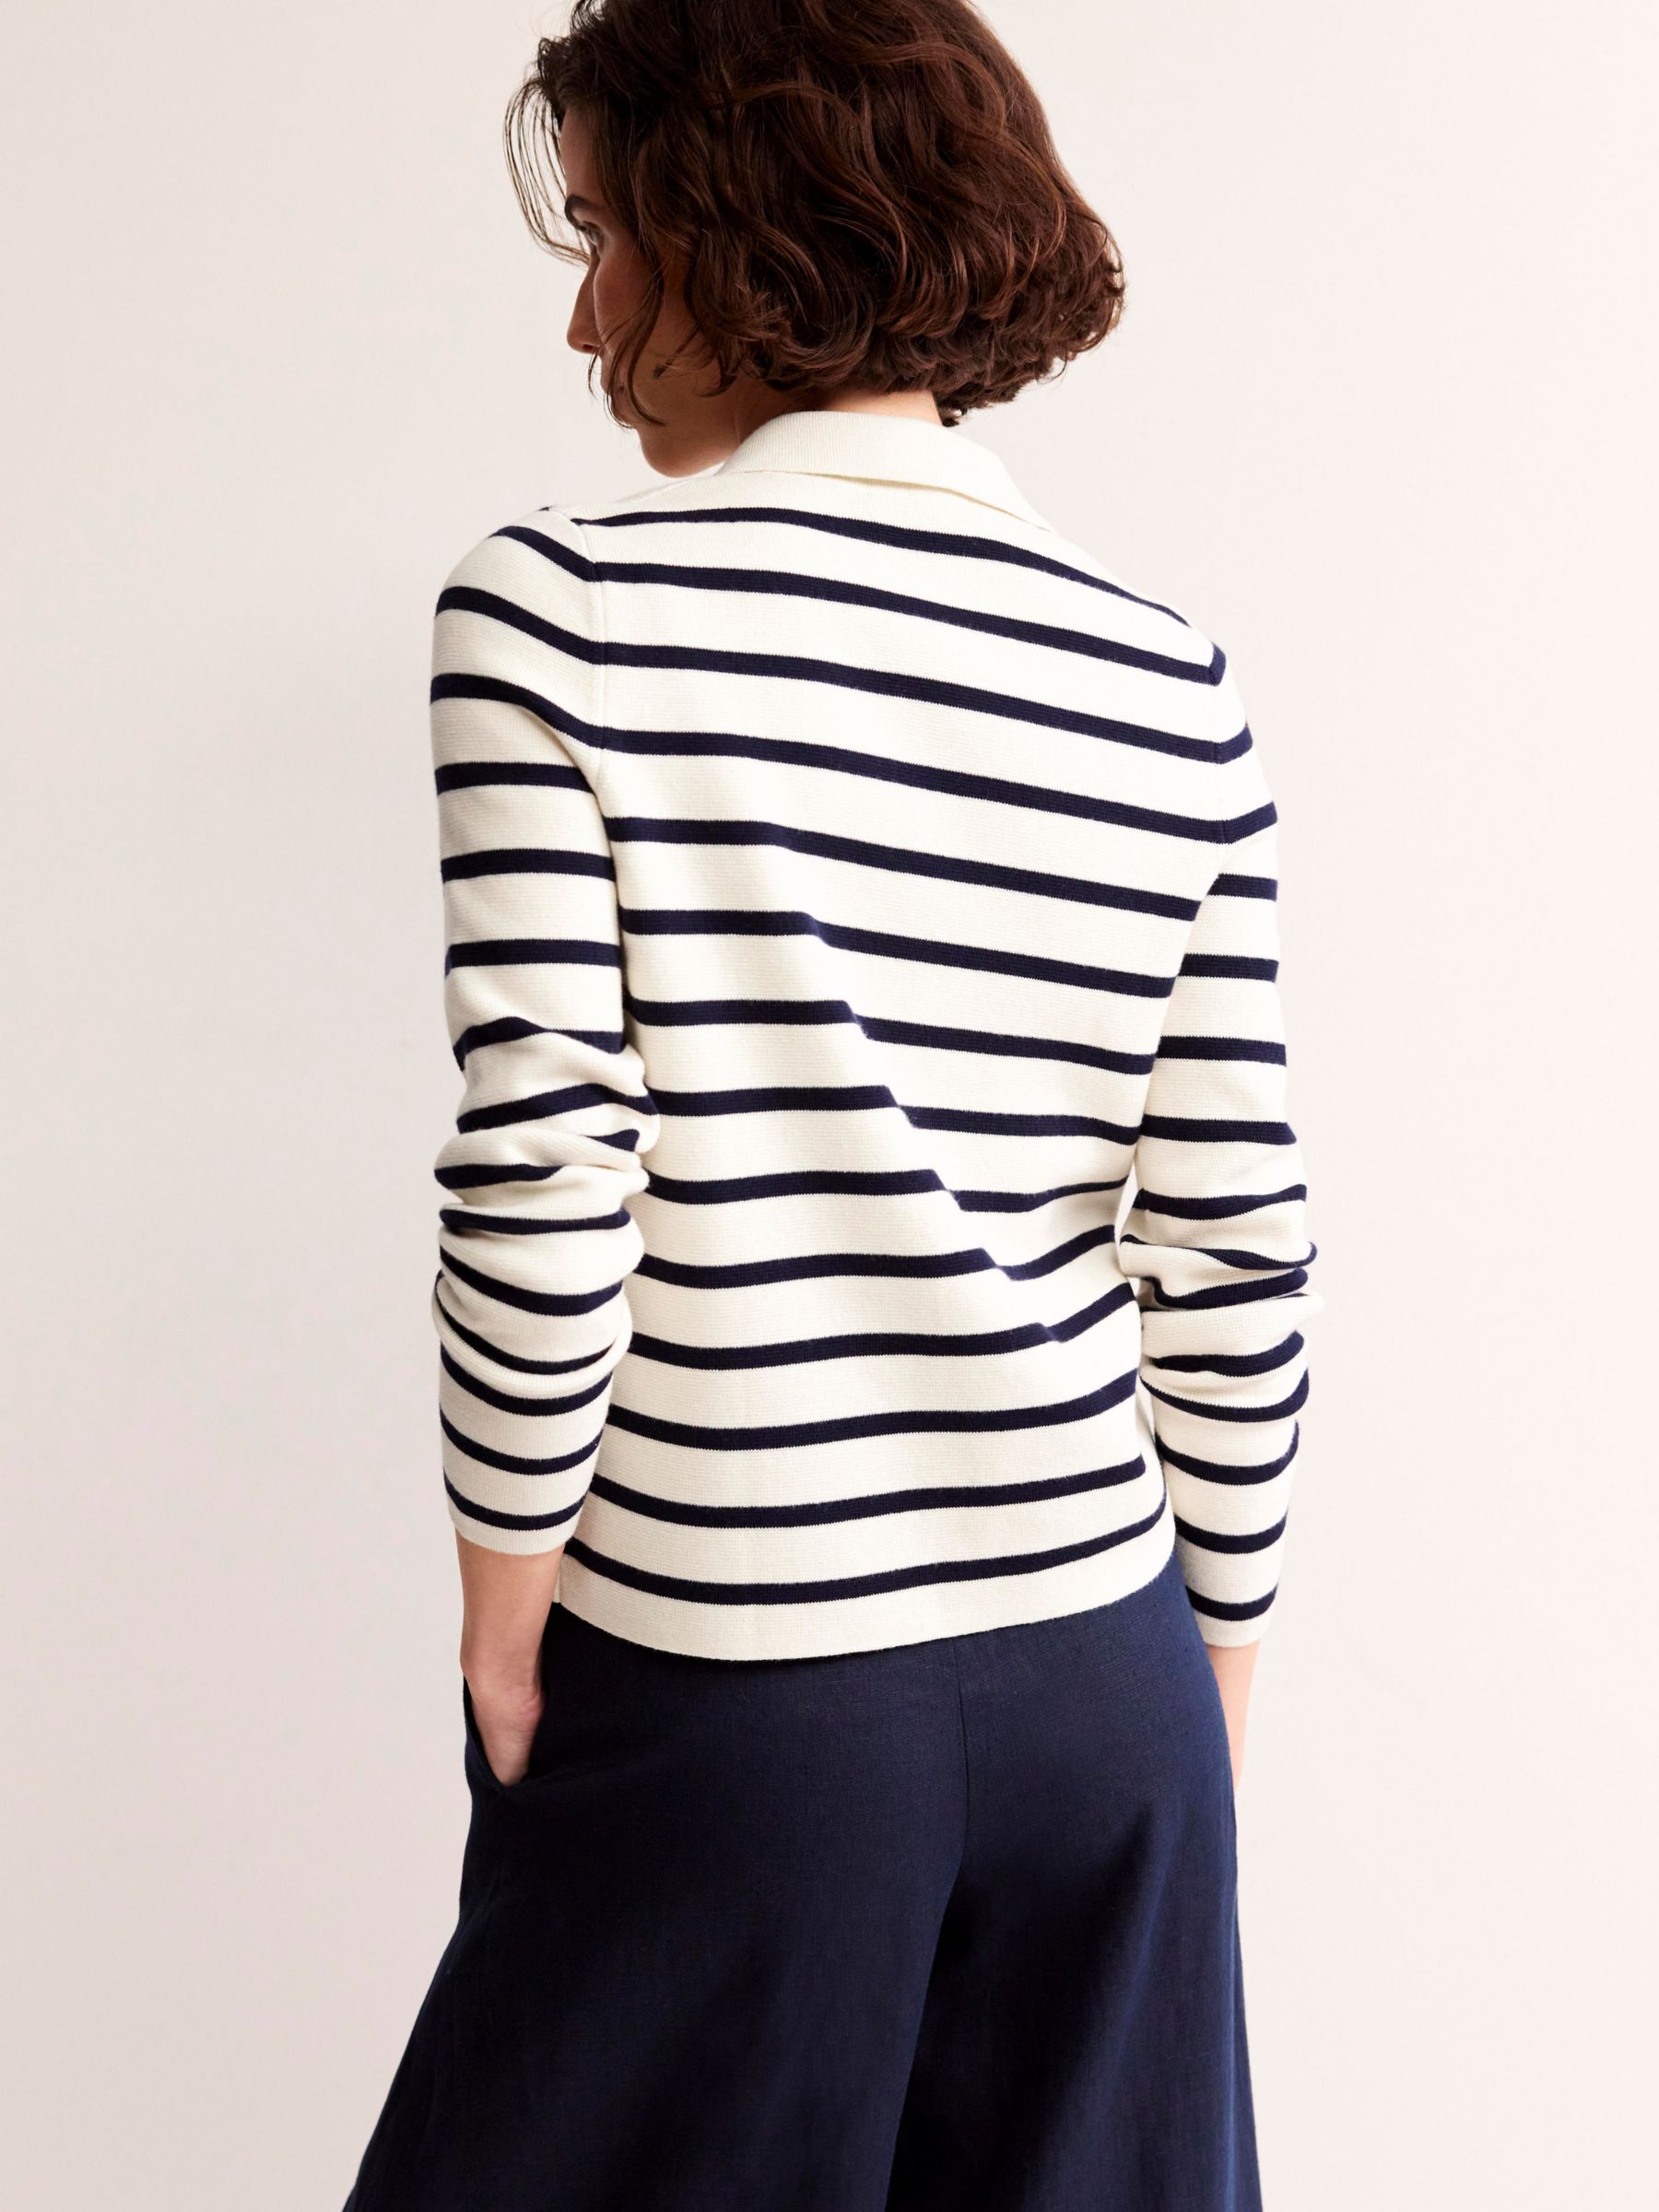 Buy Boden Wool Blend Knitted Cardigan, Warm Ivory/Navy Online at johnlewis.com